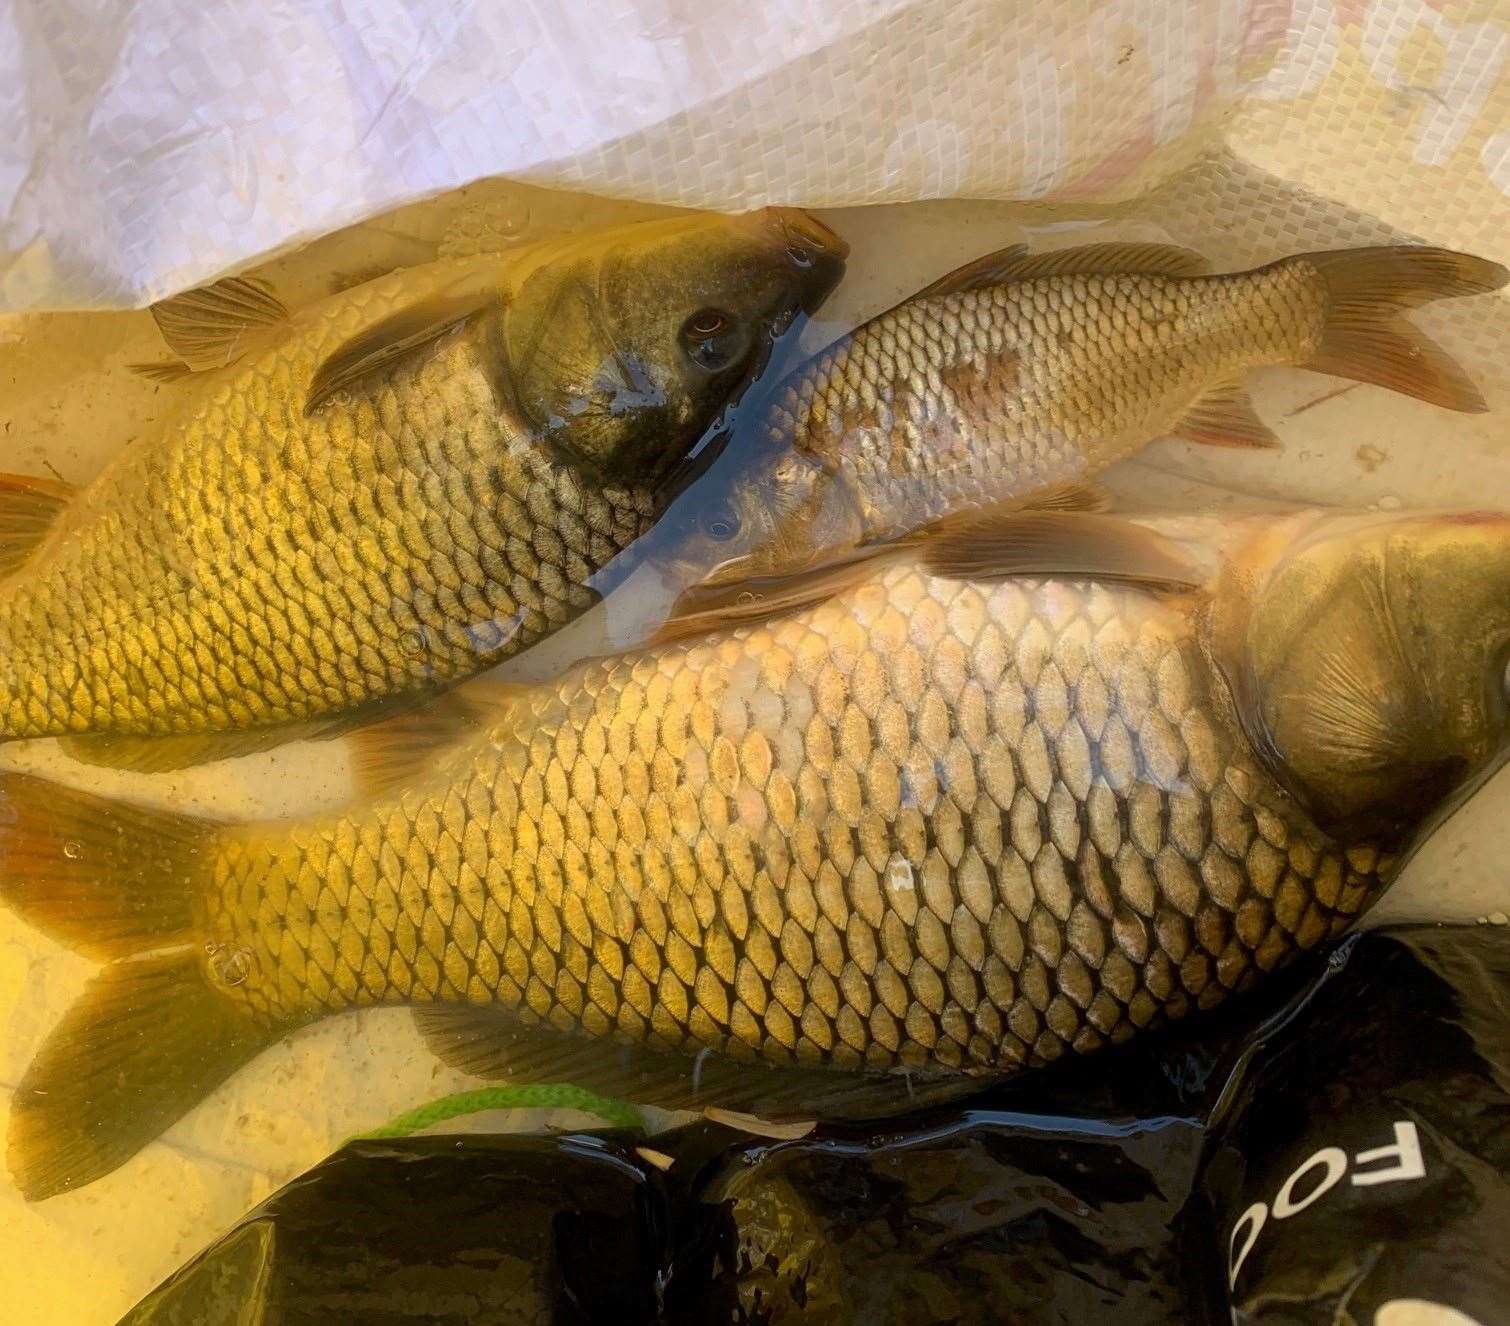 Seized fish from an angler in the South East. Picture: Environment Agency